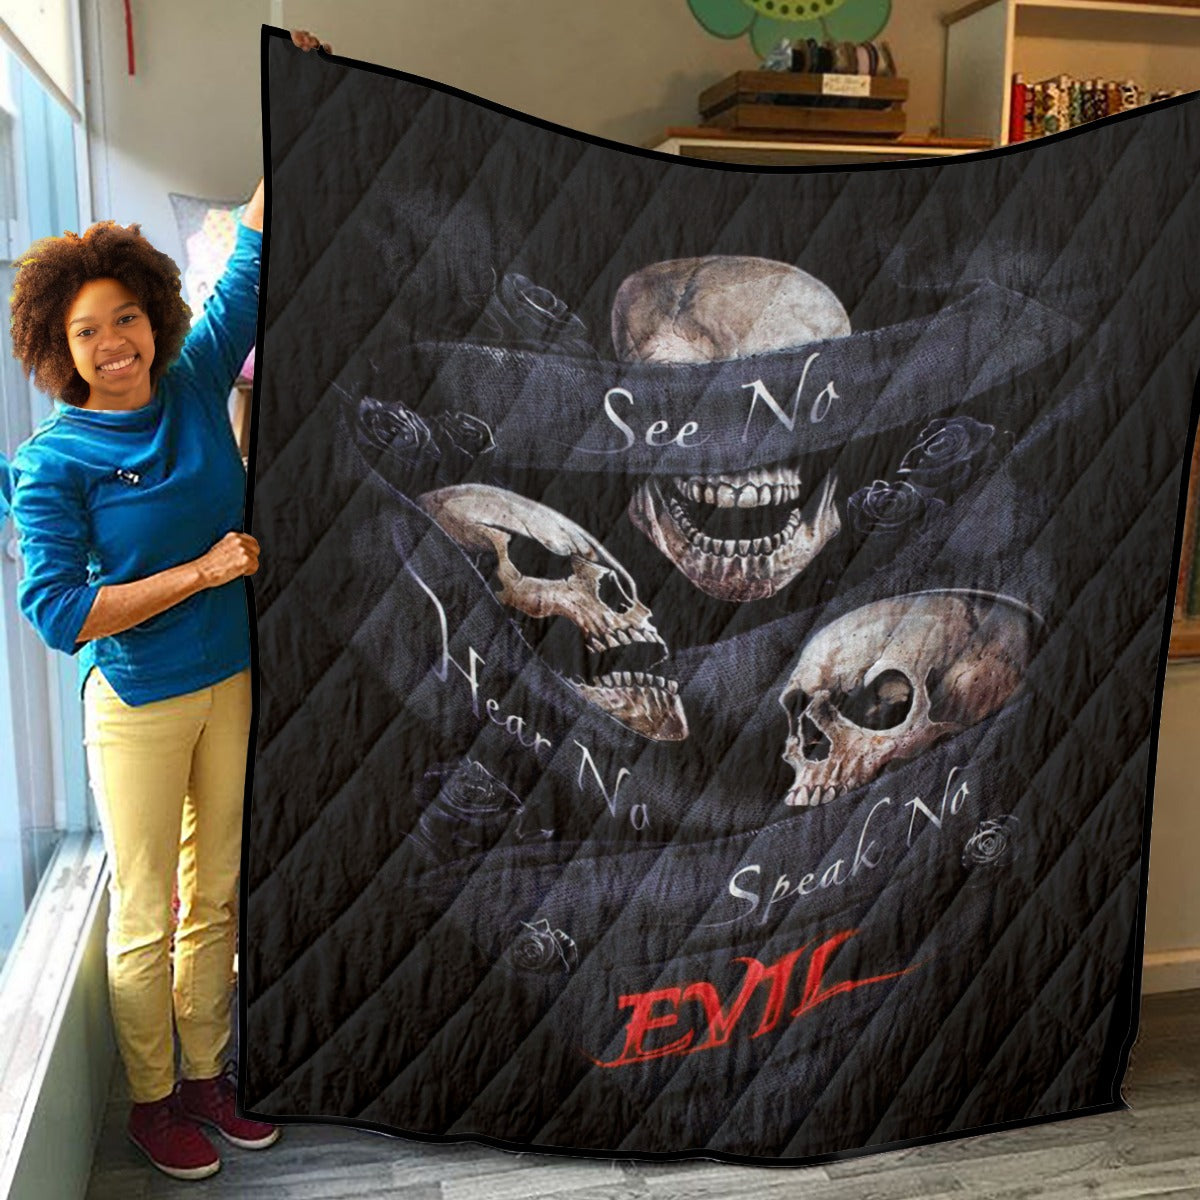 No see no hear no speak evils Household Lightweight & Breathable Quilt